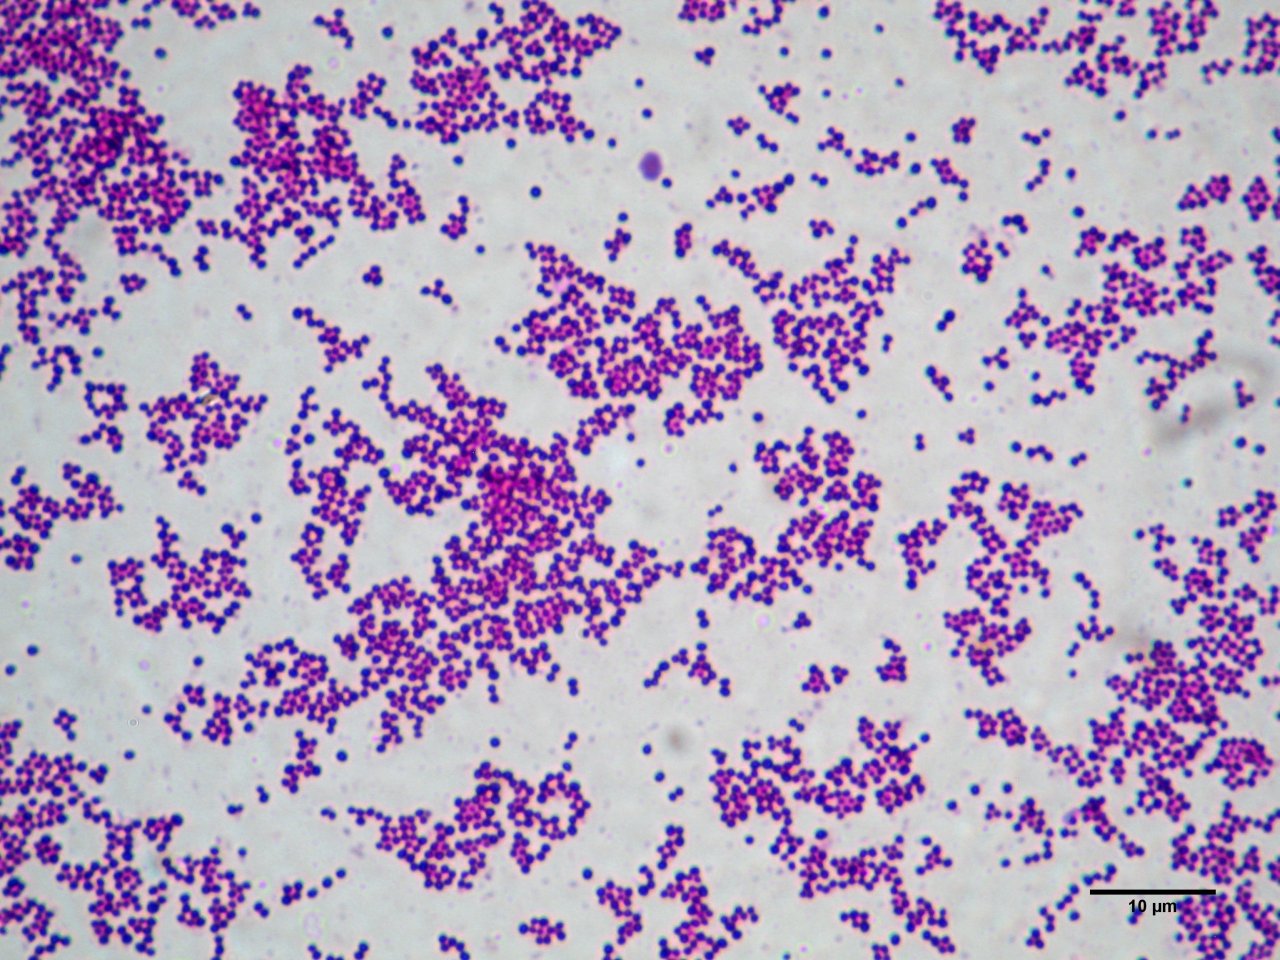 Staphylococcus Images - Photos - Pictures - CrystalGraphics